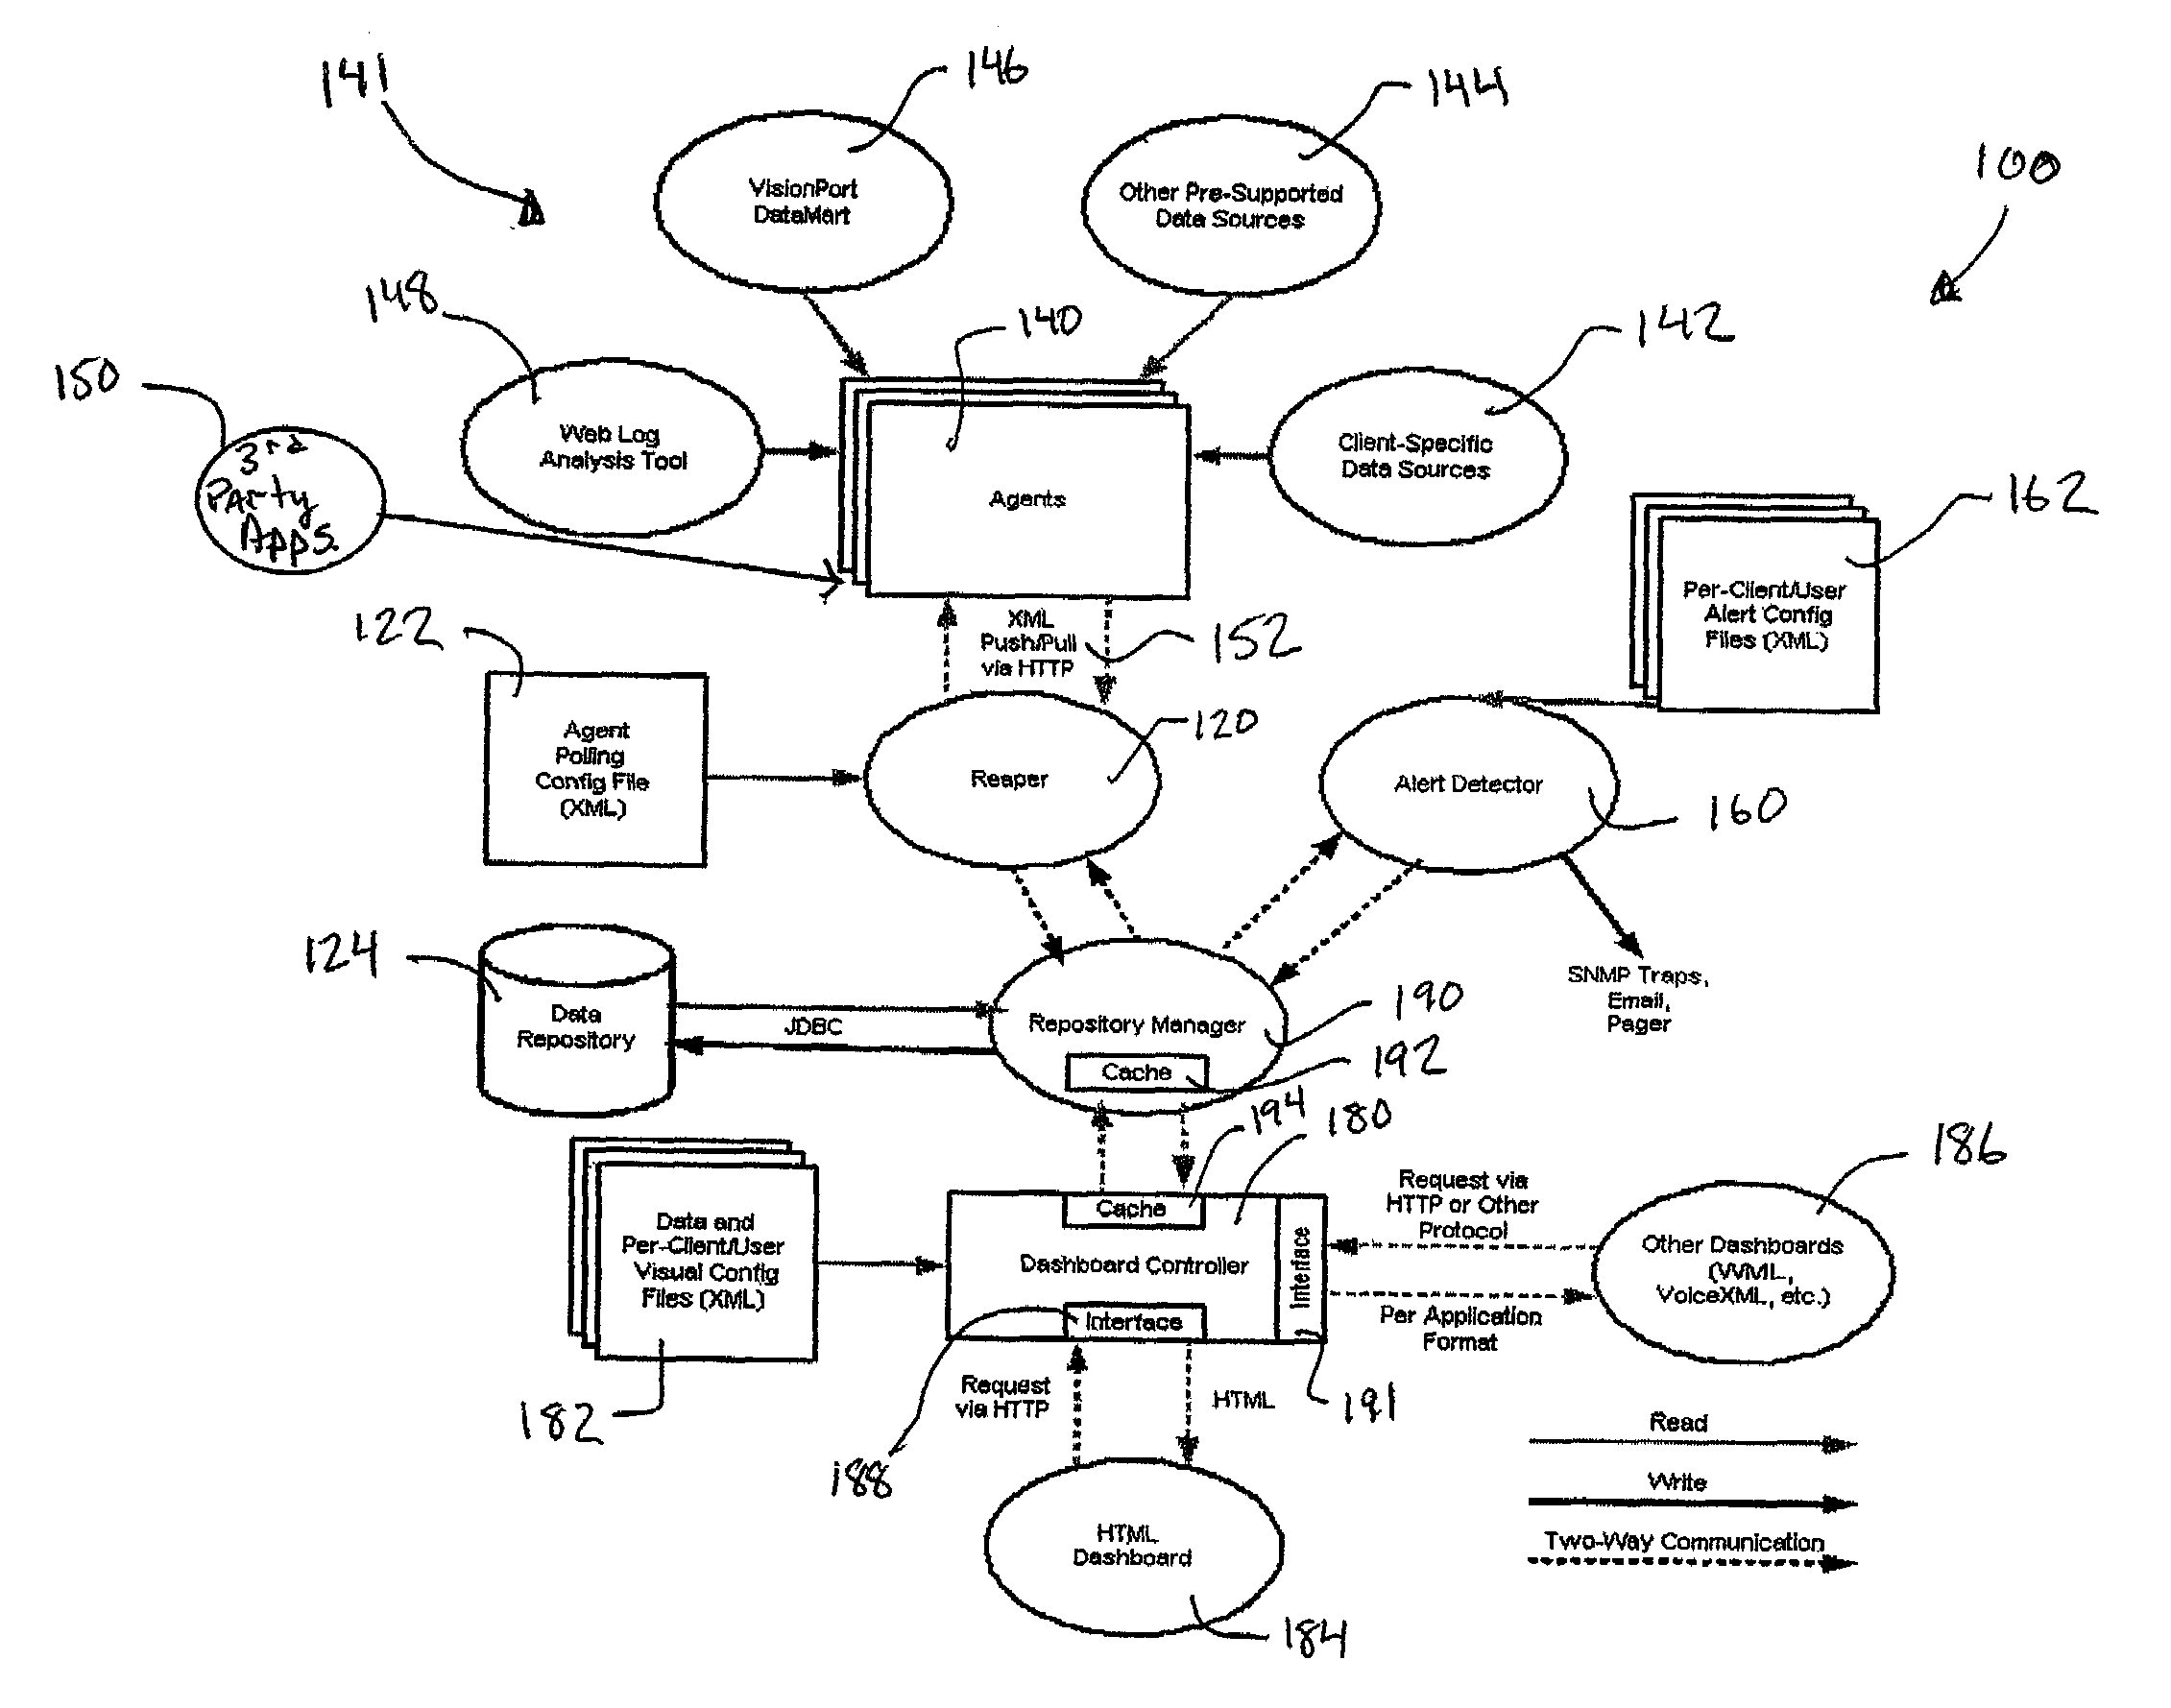 System and method for monitoring key performance indicators in a business